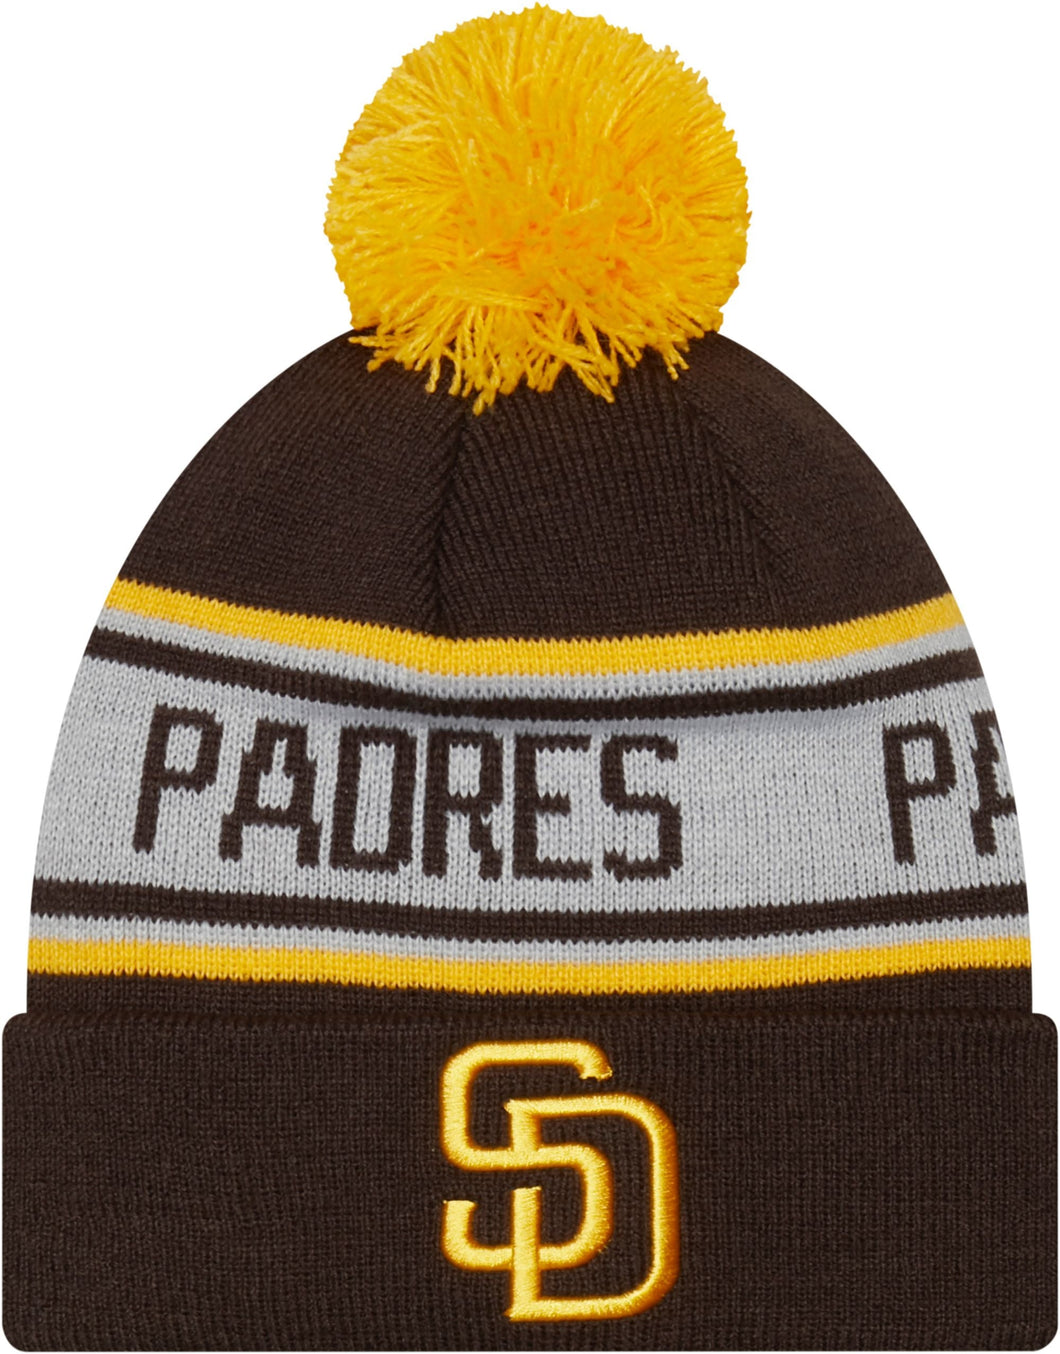 San Diego Padres New Era MLB Cuffed Pom Knit Hat Brown/White Crown Yellow Team Color Logo (Repeat)